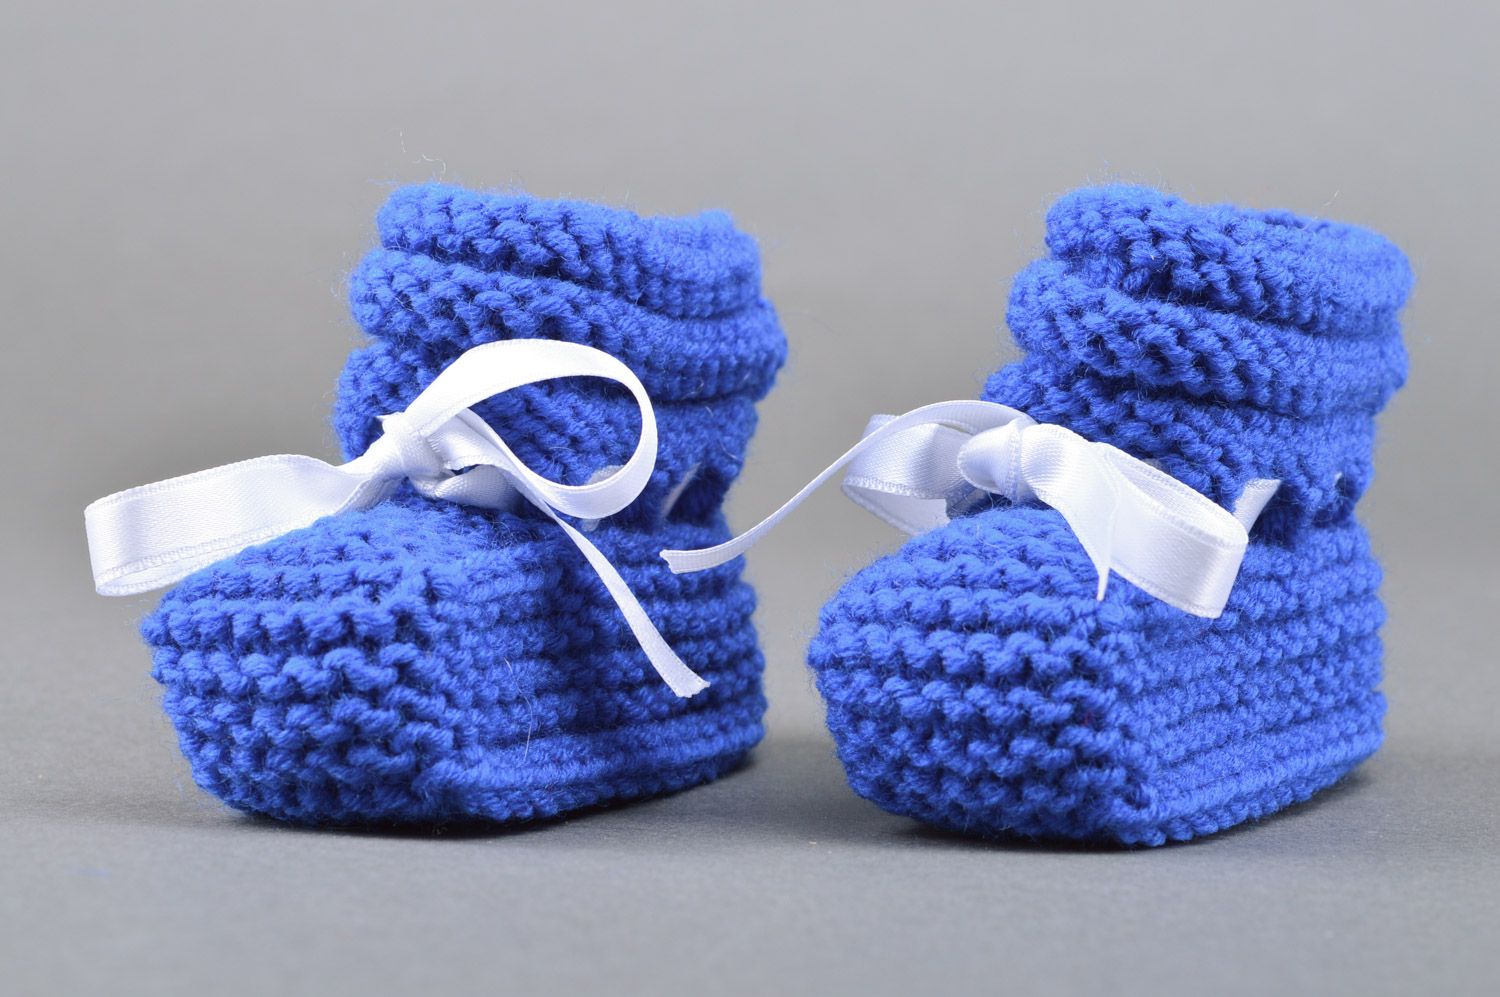 Handmade baby booties knitted of bright blue semi-woolen threads with satin bow photo 5